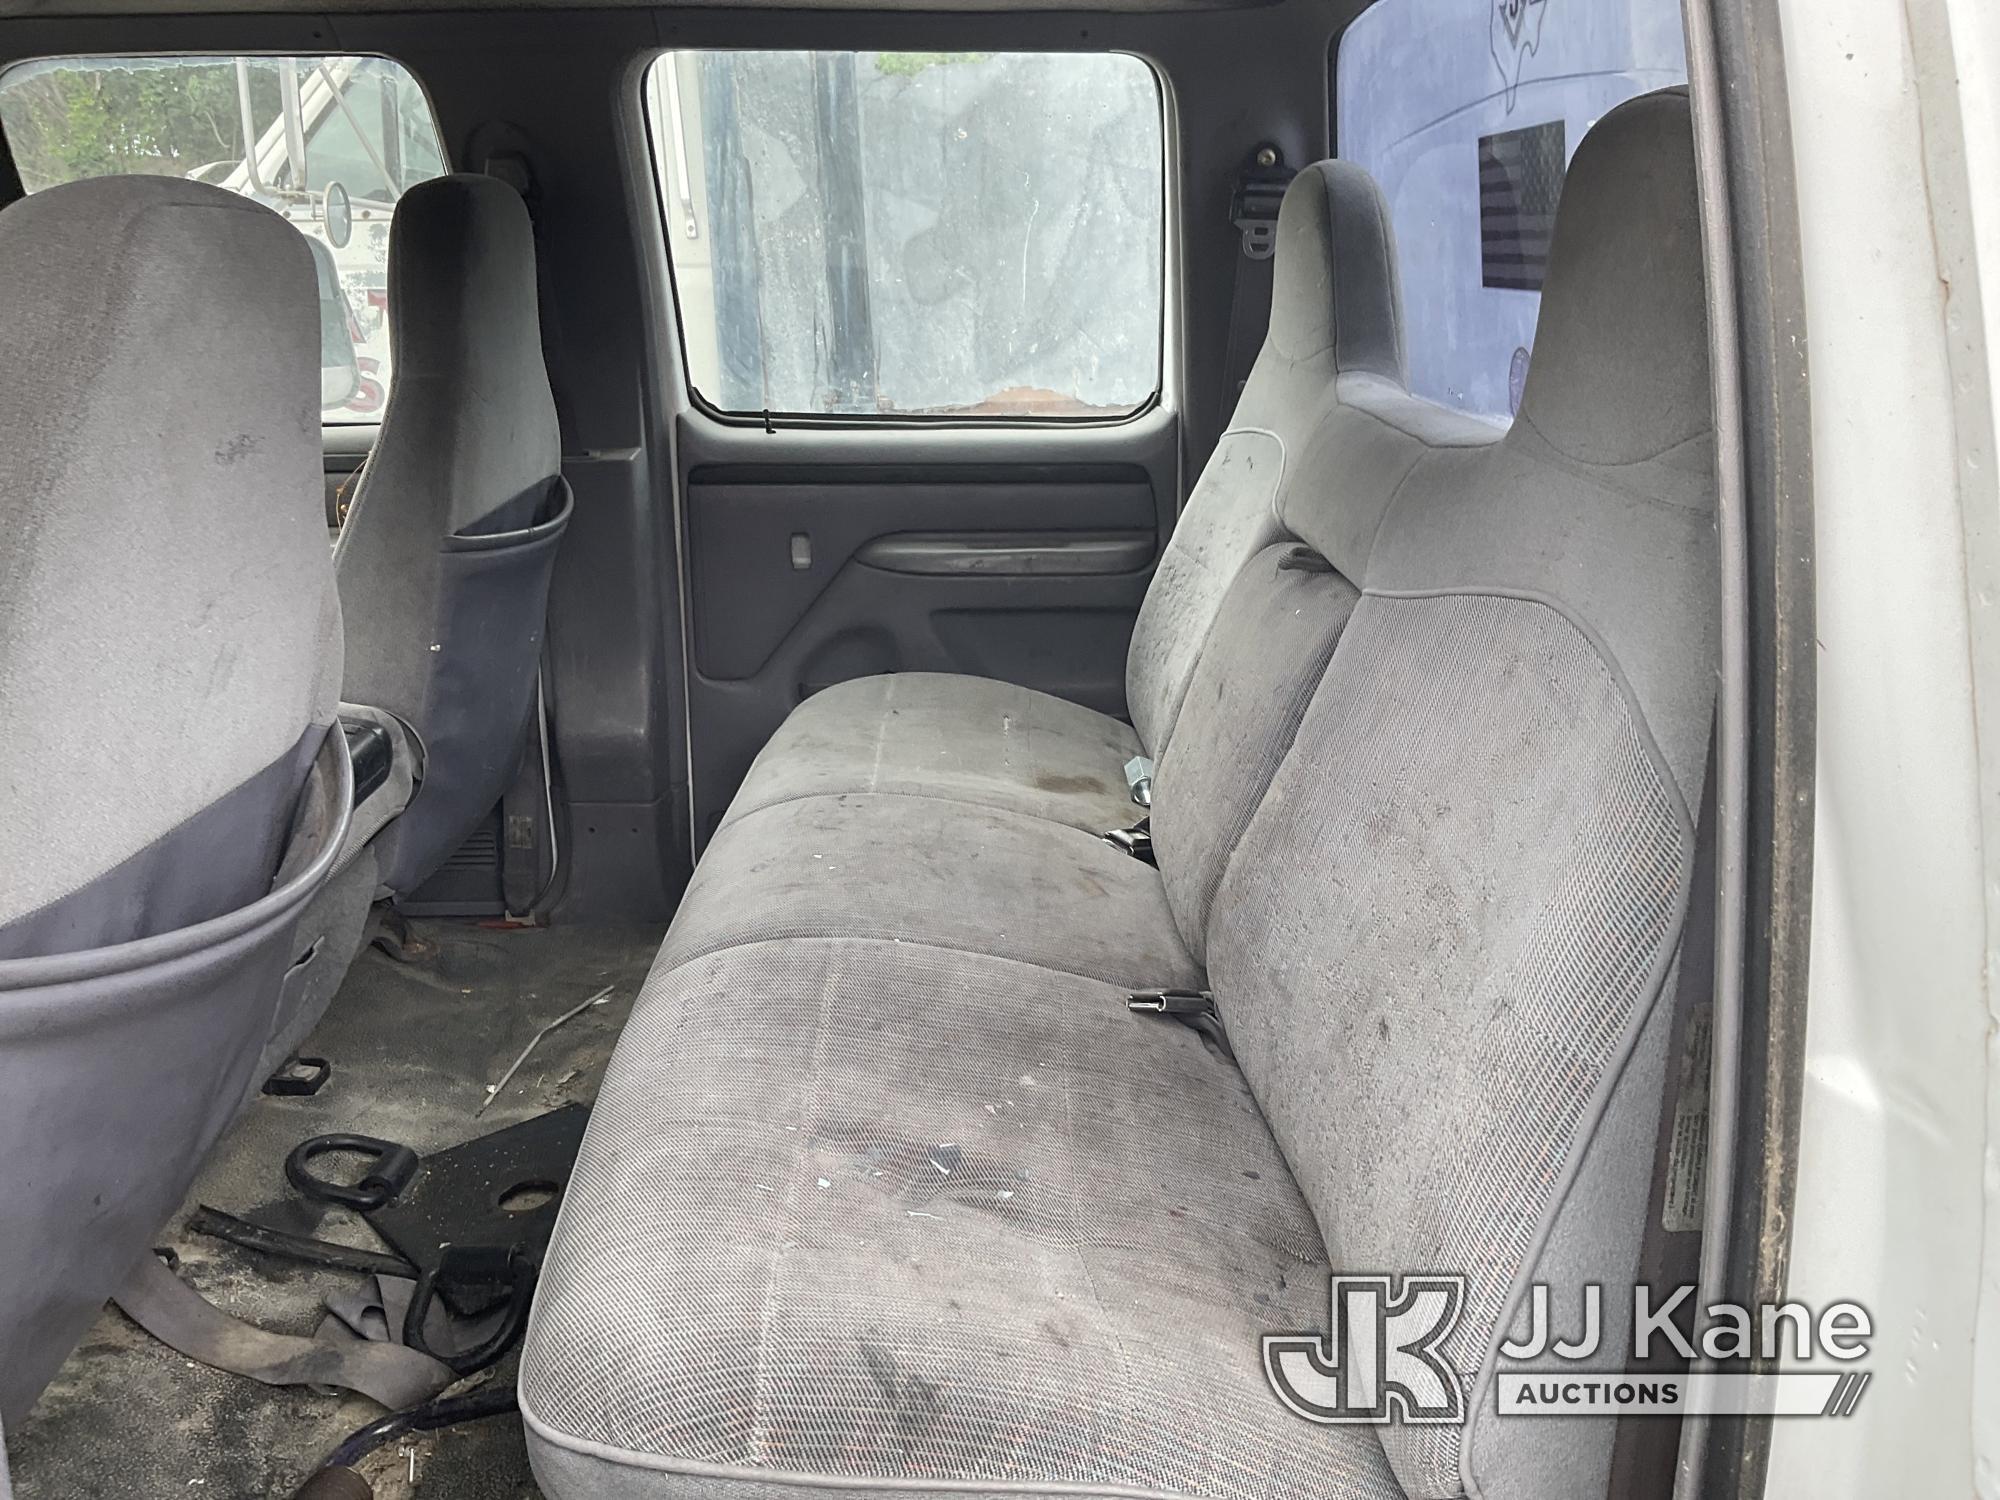 (Houston, TX) 1996 Ford F350 Crew-Cab Dual Wheel Pickup Truck Not Running, Condition Unknown) (Per s